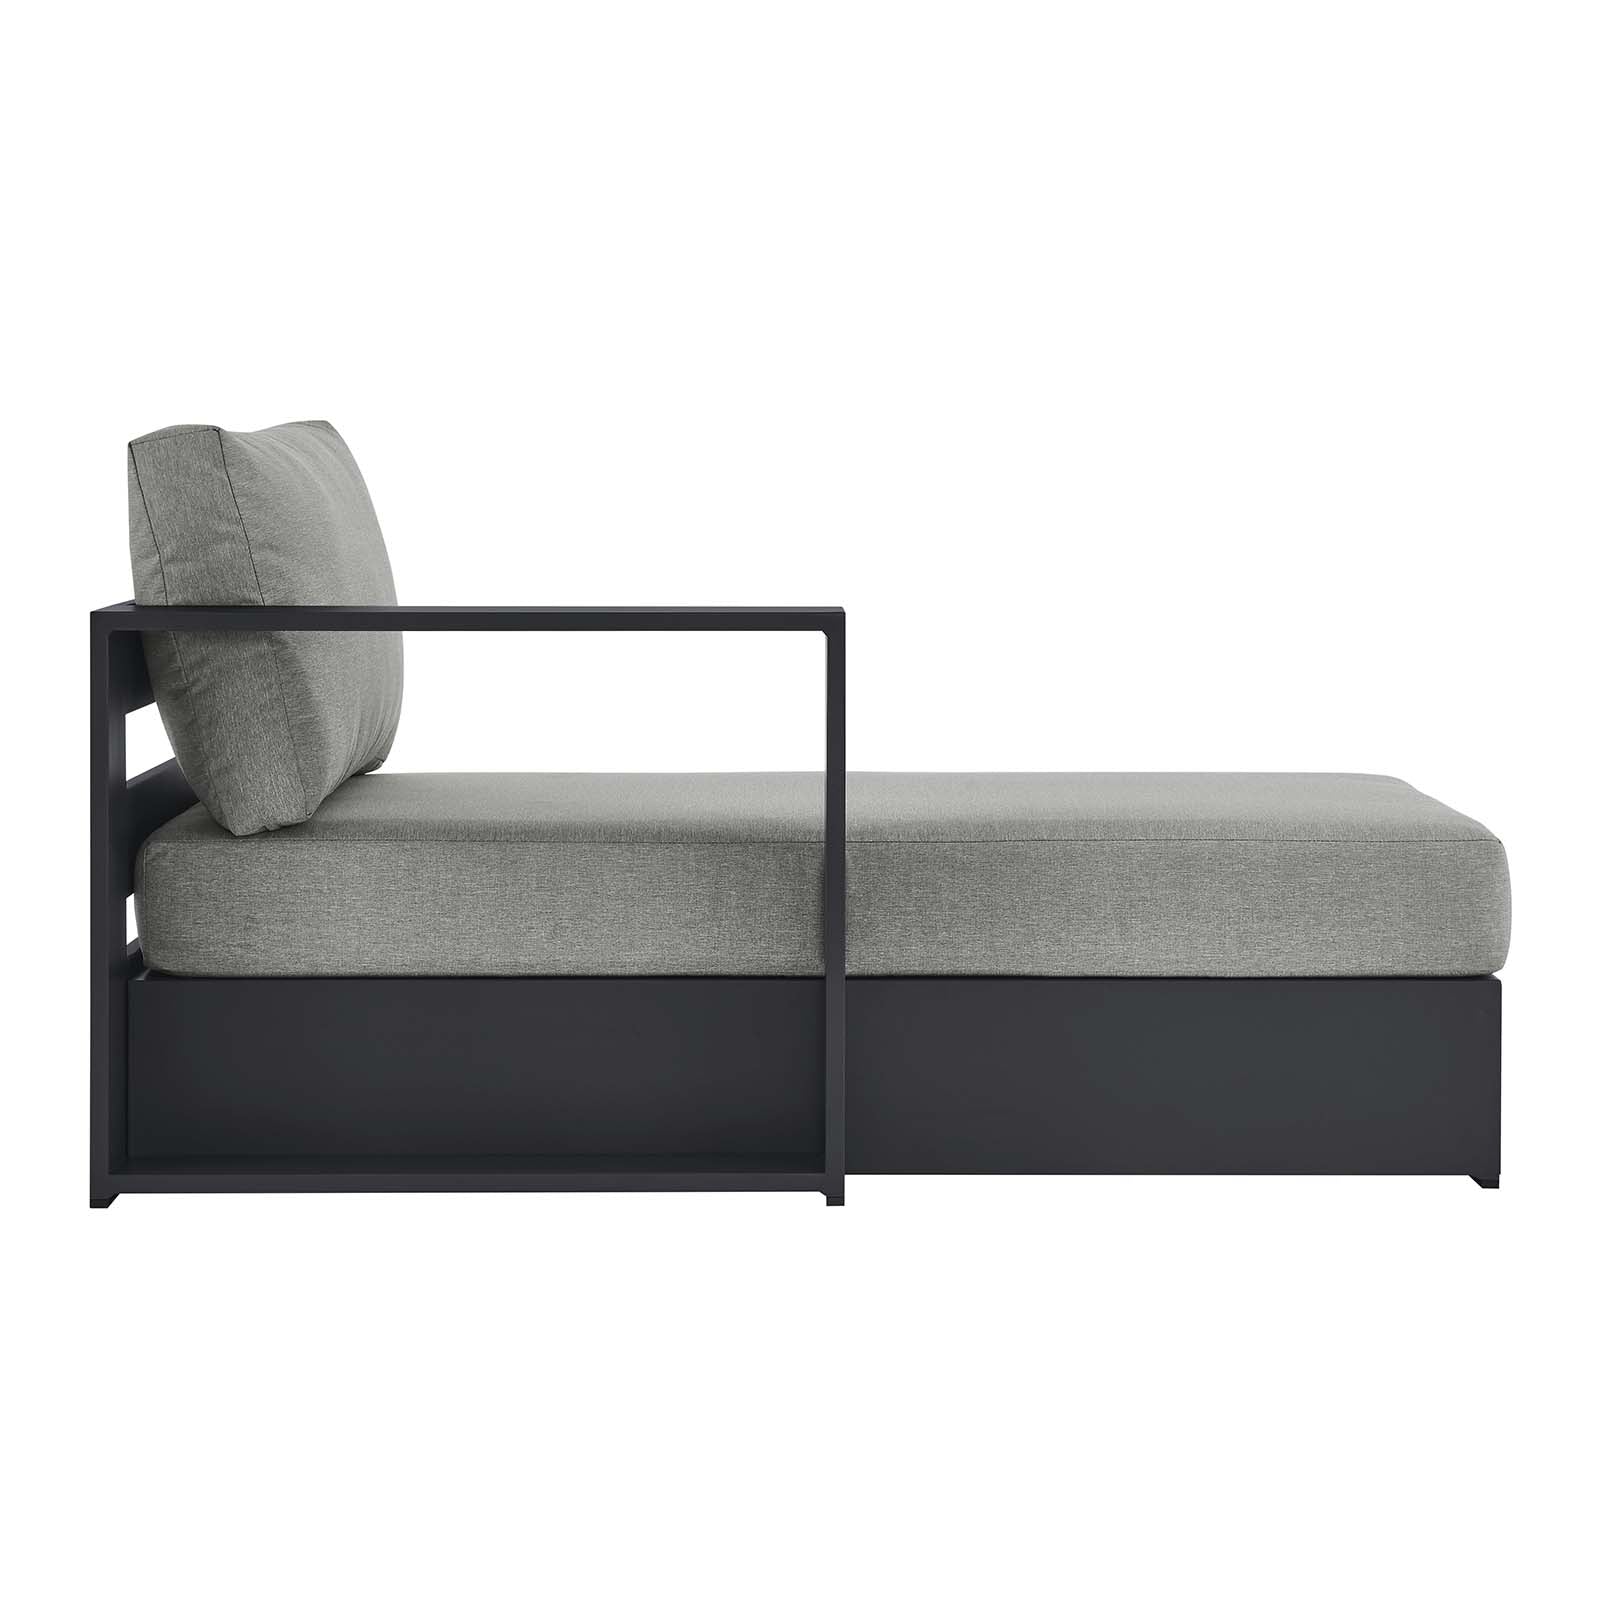 Tahoe Outdoor Patio Powder-Coated Aluminum Modular Left-Facing Chaise Lounge-Outdoor Chaise-Modway-Wall2Wall Furnishings